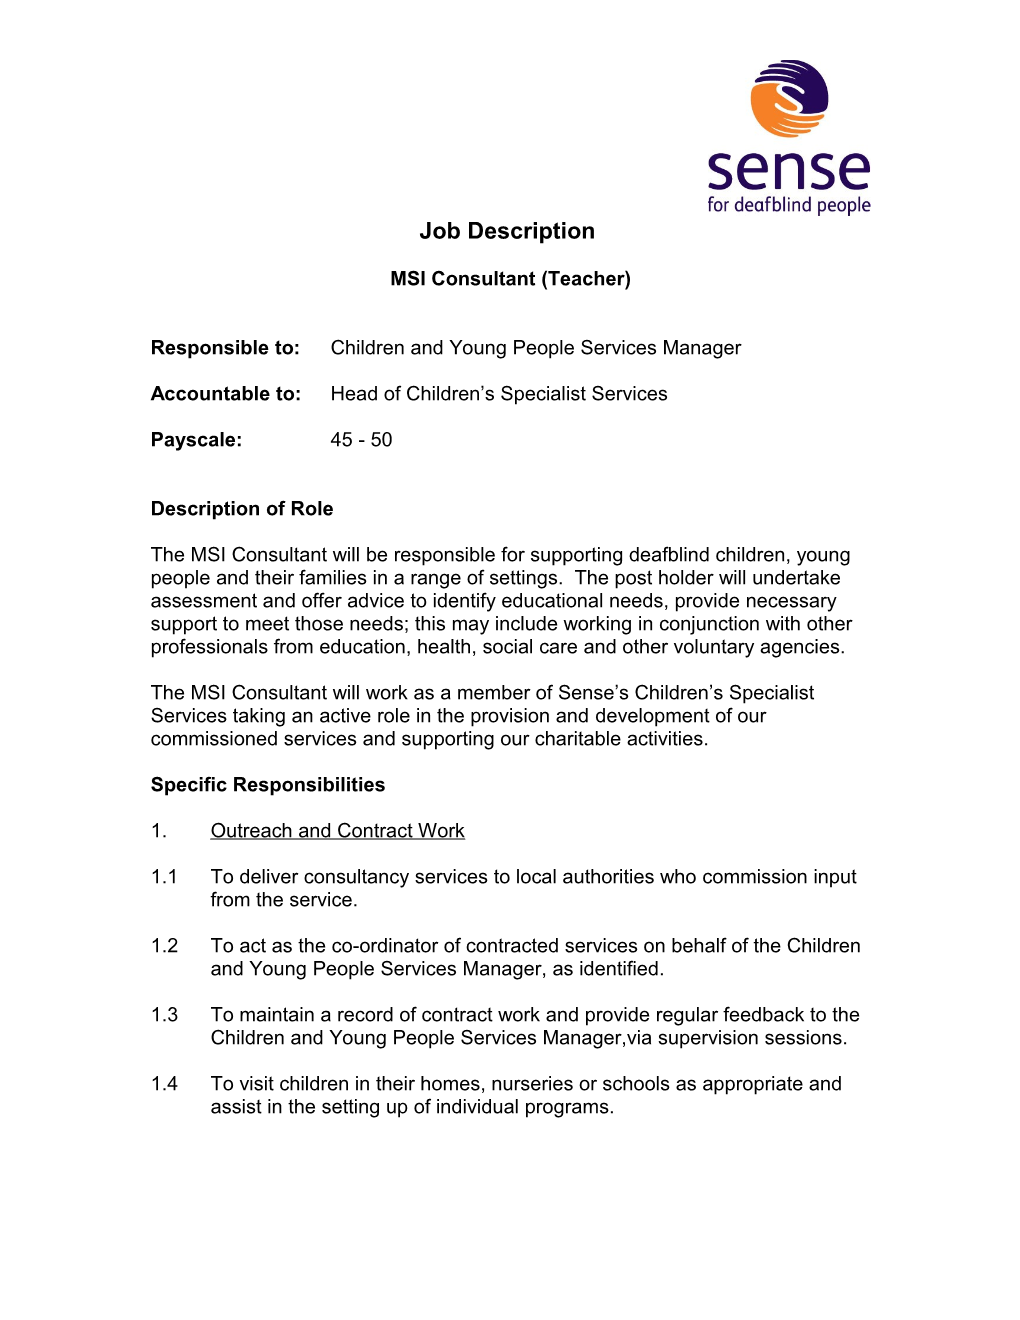 Responsible To:Children and Young People Services Manager